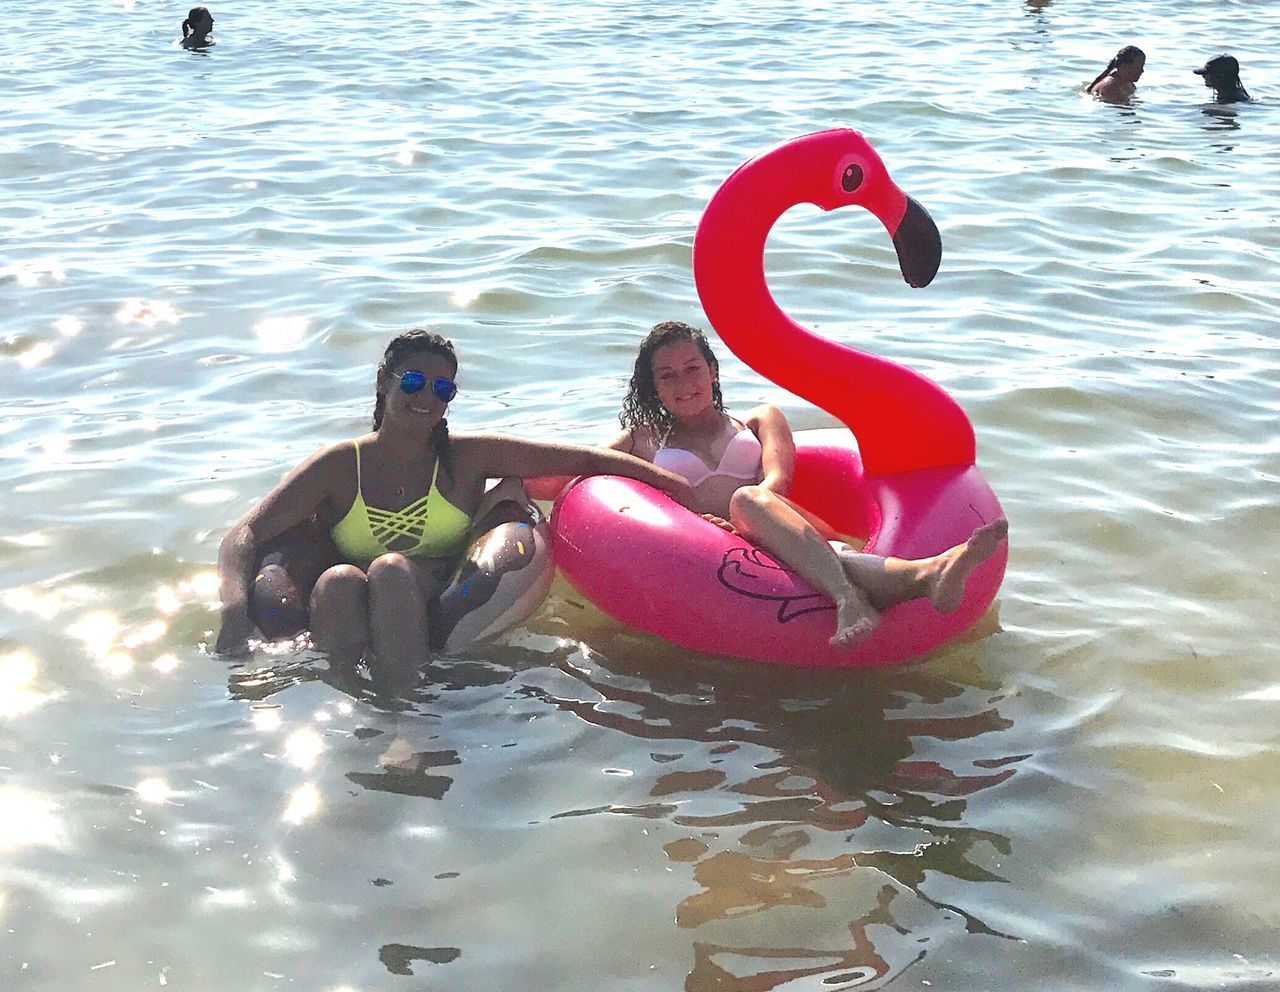 real people, water, leisure activity, day, togetherness, sitting, mature women, lifestyles, smiling, happiness, two people, outdoors, young women, full length, young adult, nature, flamingo, people